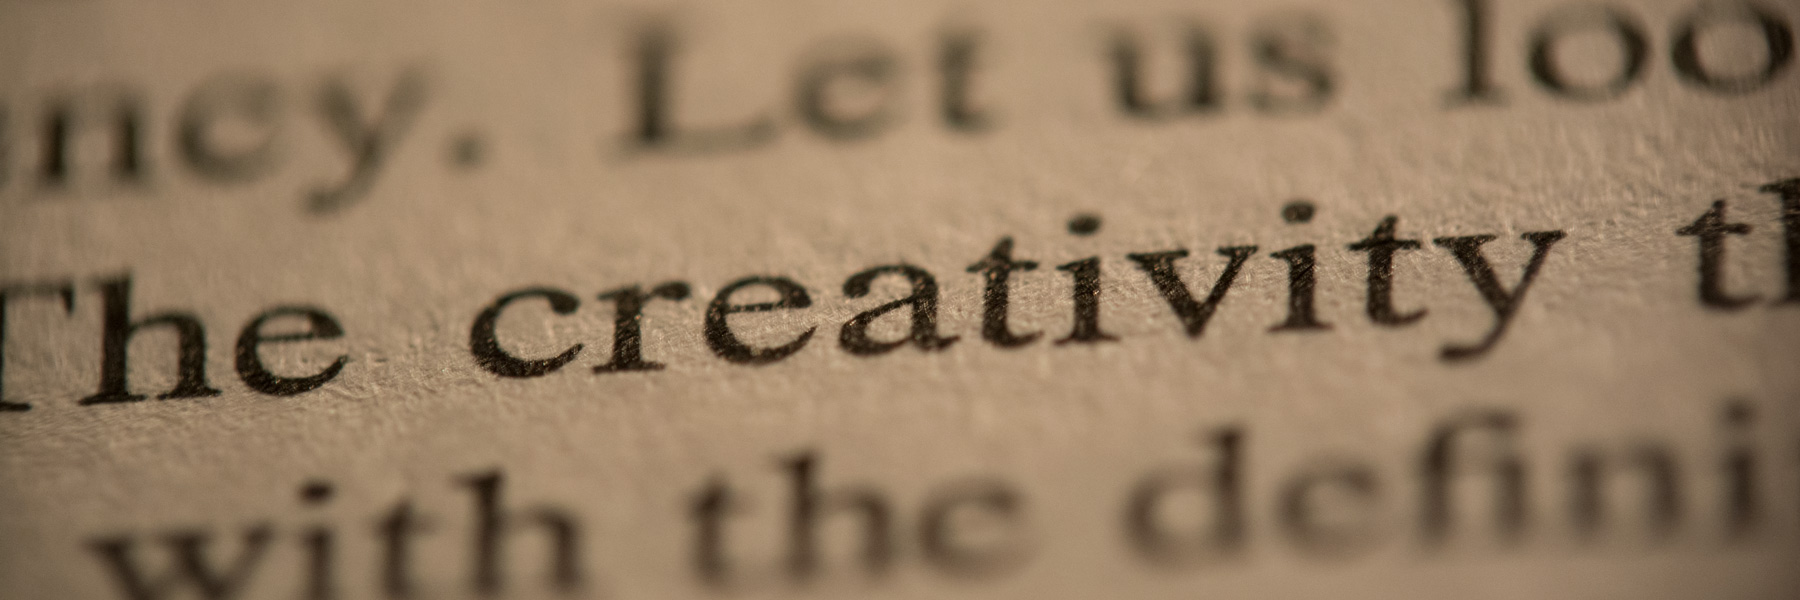 The word creativity on a printed page in close focus